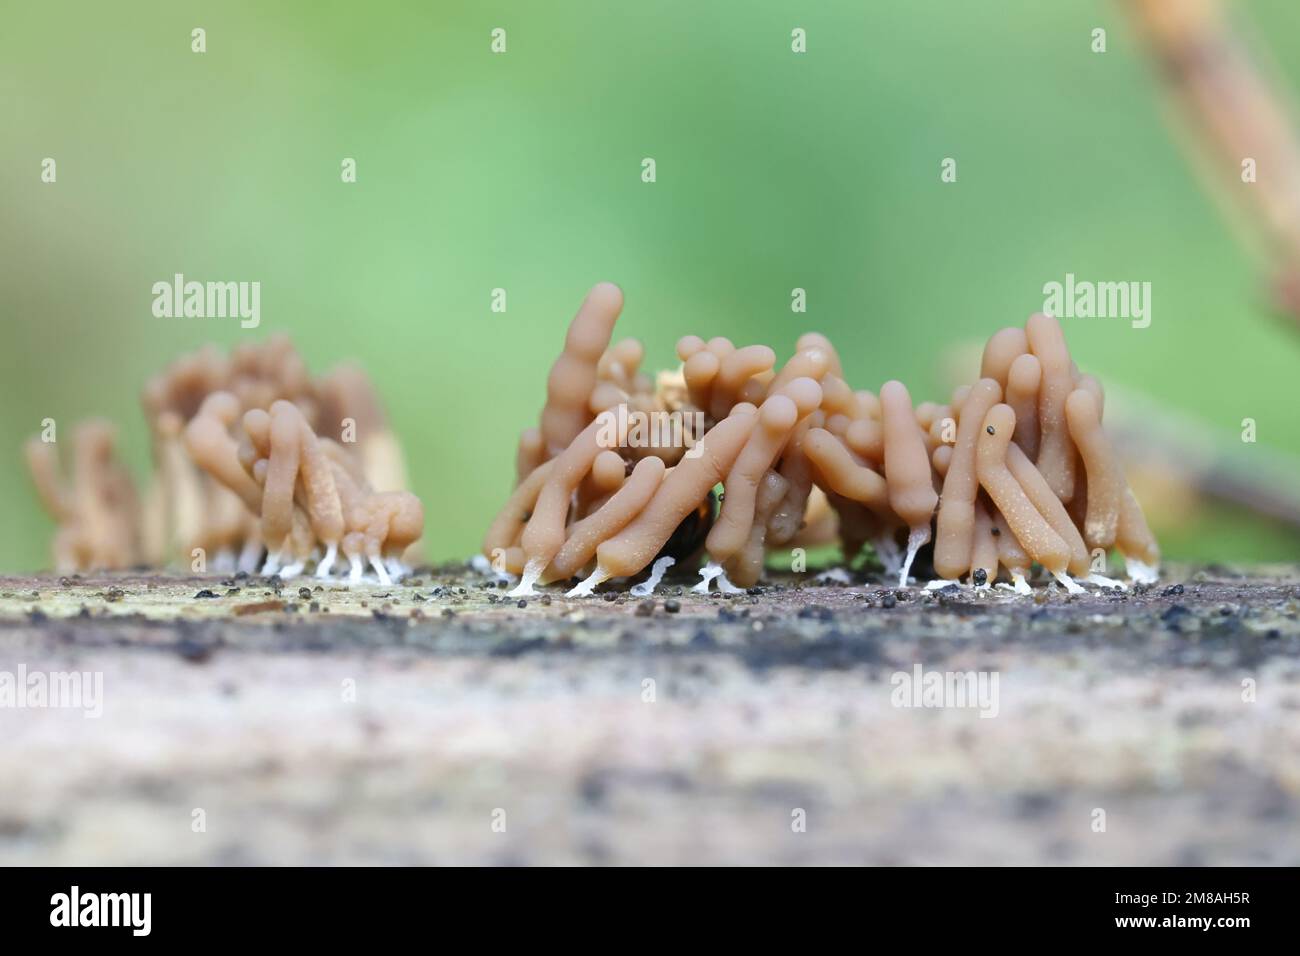 Arcyria obvelata, also called Arcyria nutans, commonly known as yellow carnival candy slime mold, early development phase Stock Photo